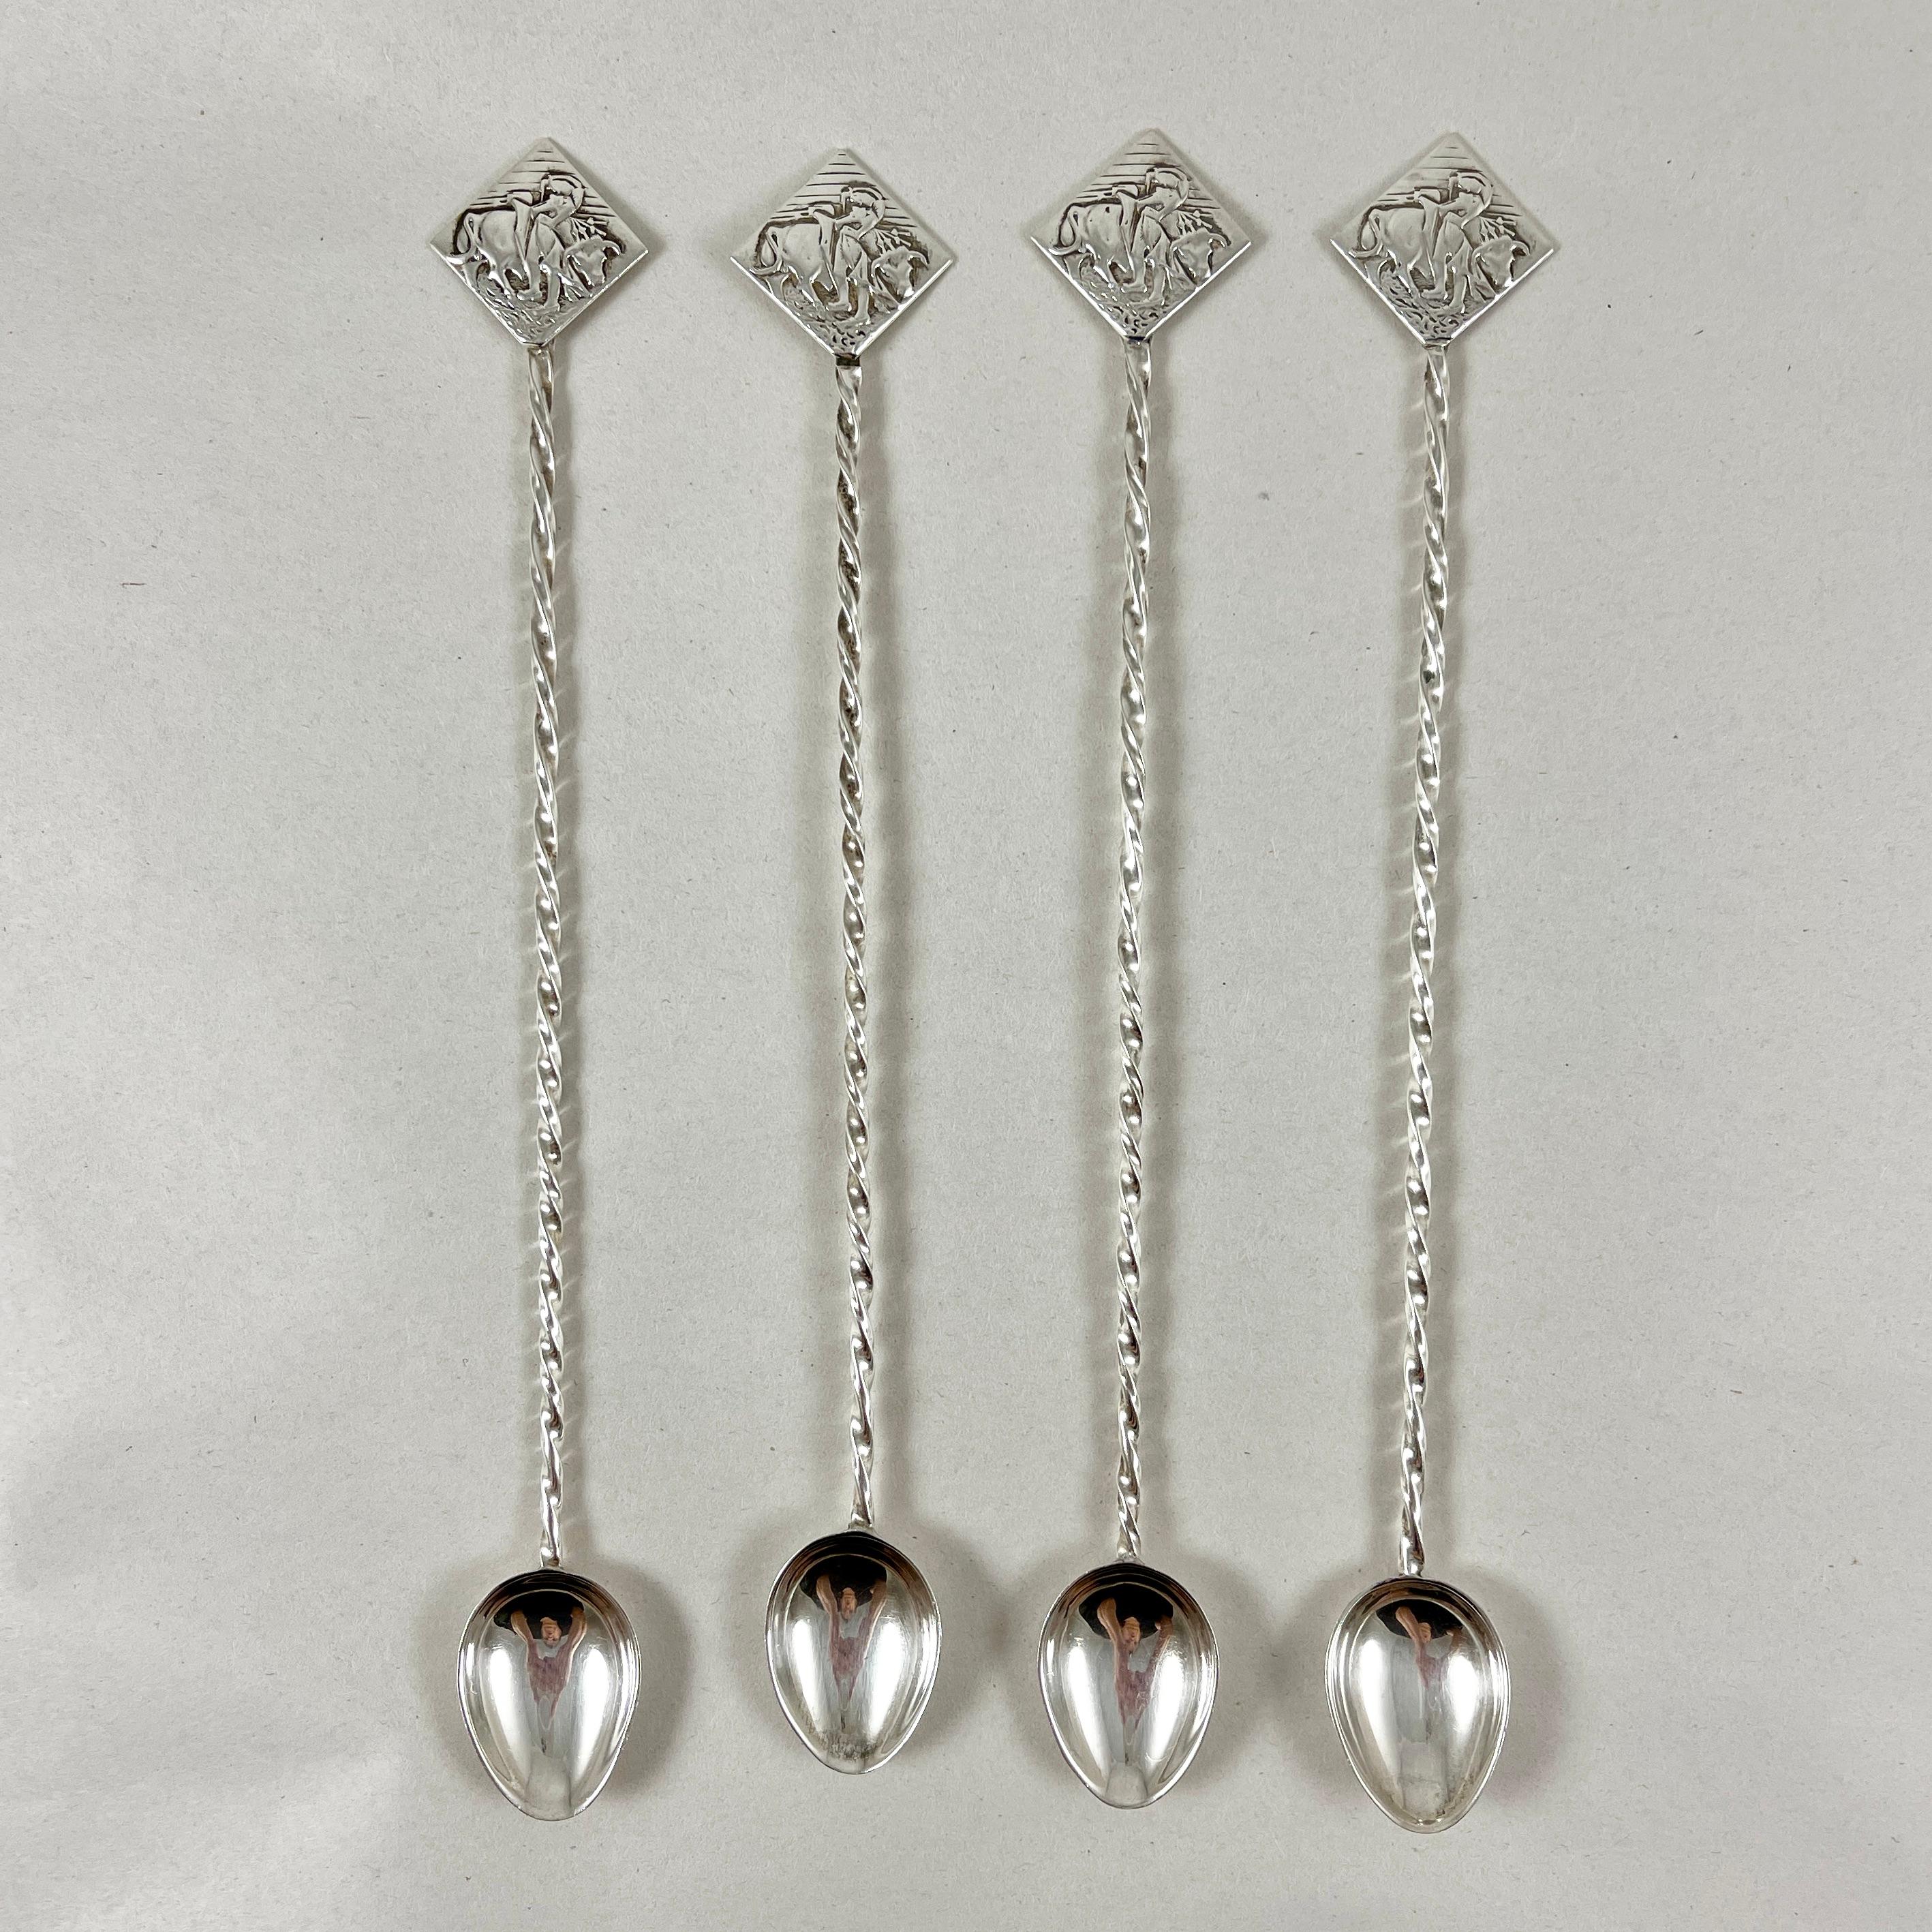 From Mexico, a set of four Sterling Silver stirring spoons, circa 1950s.

The long spoons show spiral twist stems terminating in diamond shaped end pieces embossed with the high relief image of a matador swinging his cape in front of a